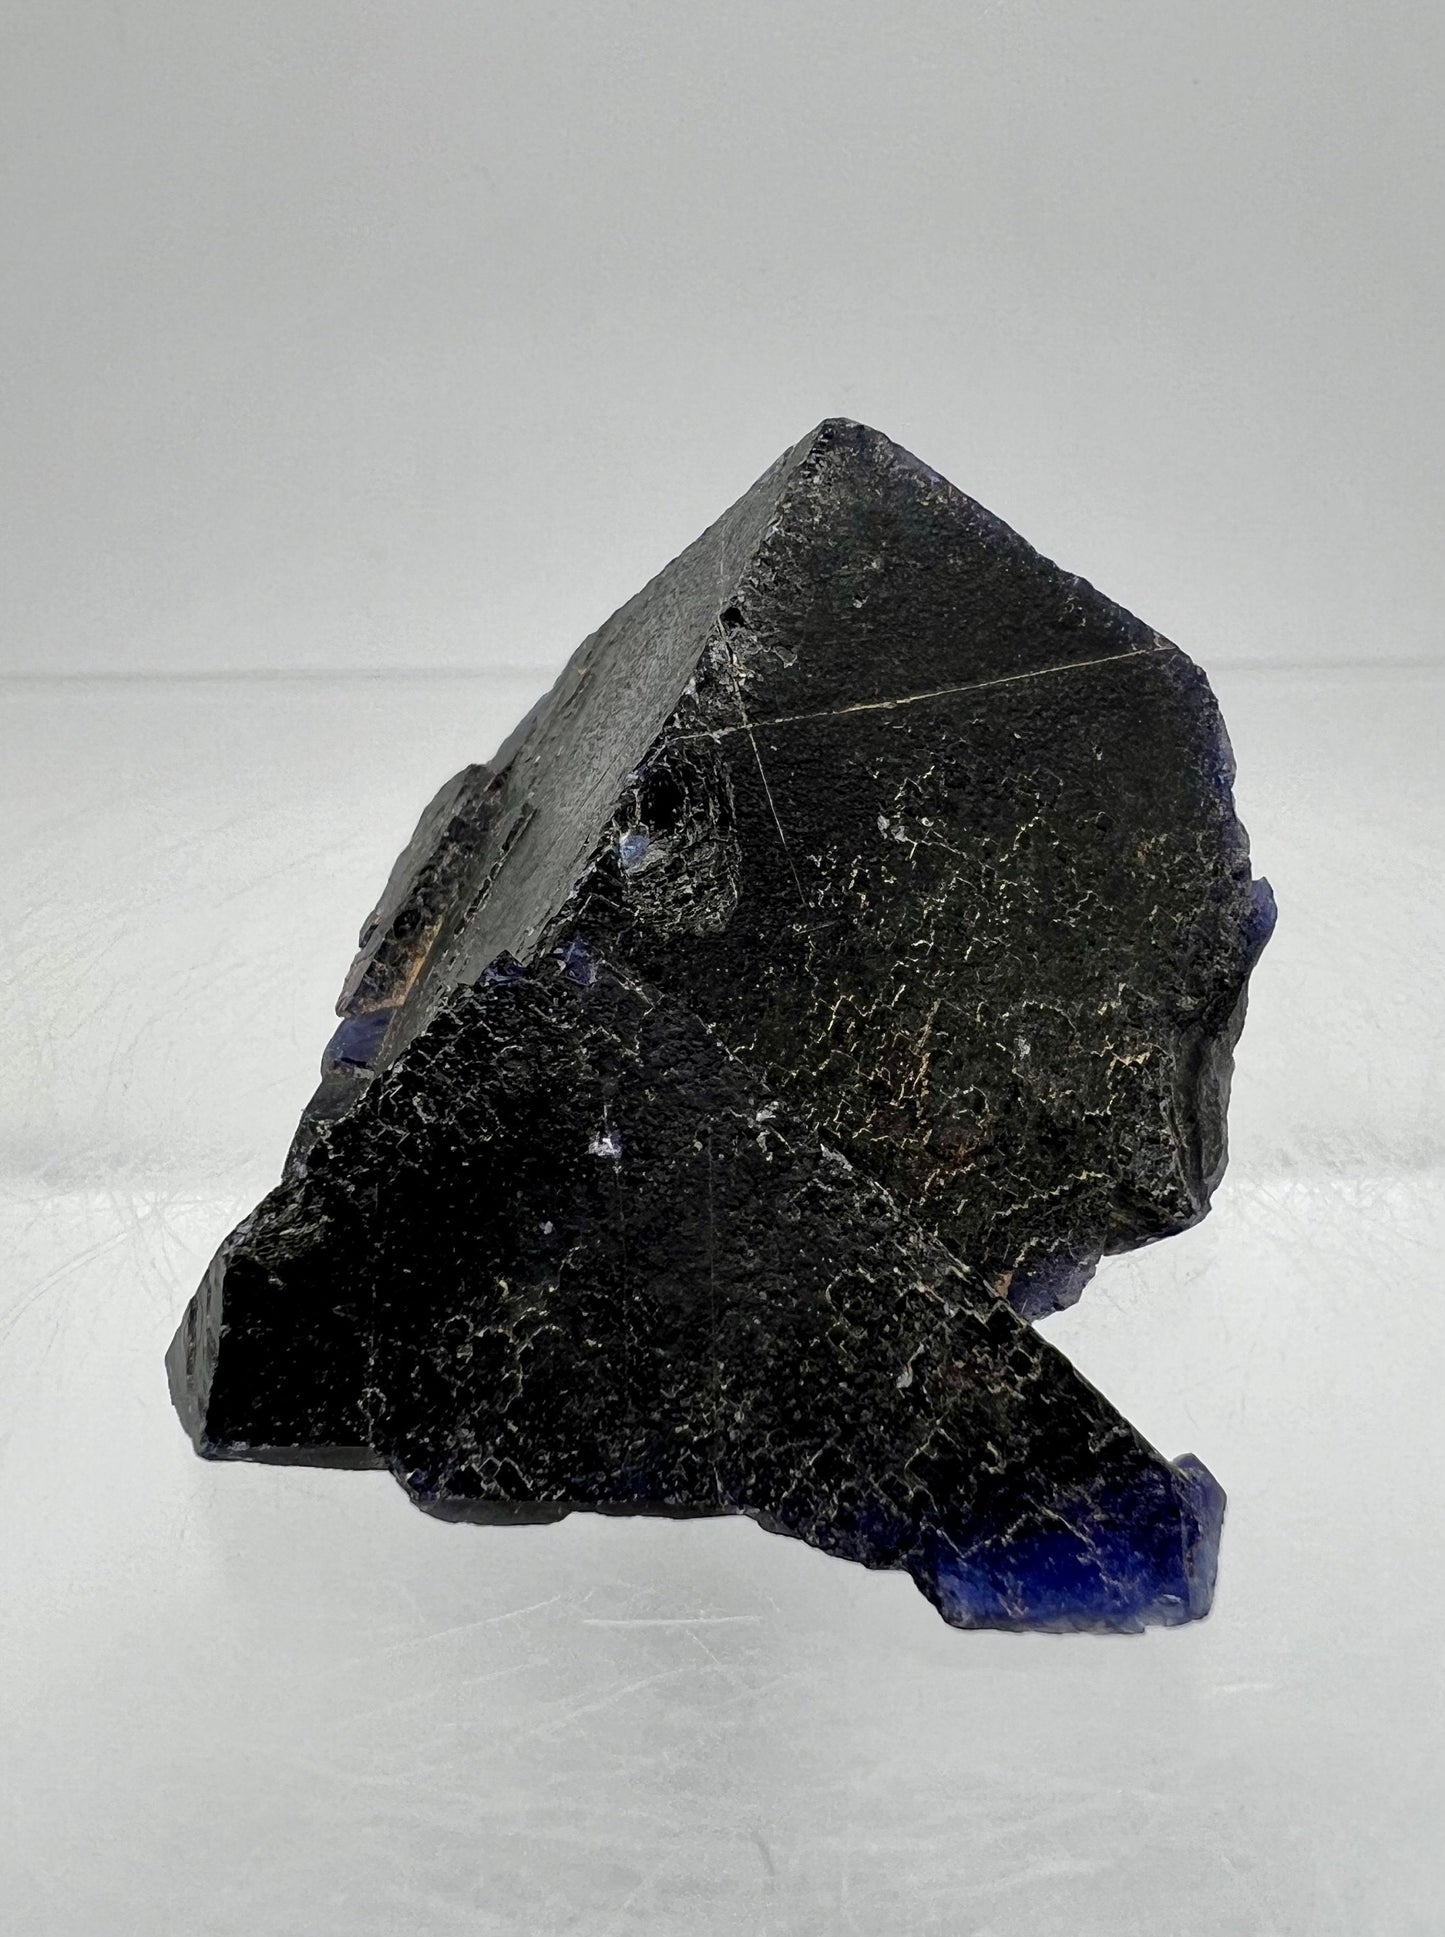 Stunning Black Rose Fluorite. UV Reacts Intense Red! Very High Quality Display Crystal.